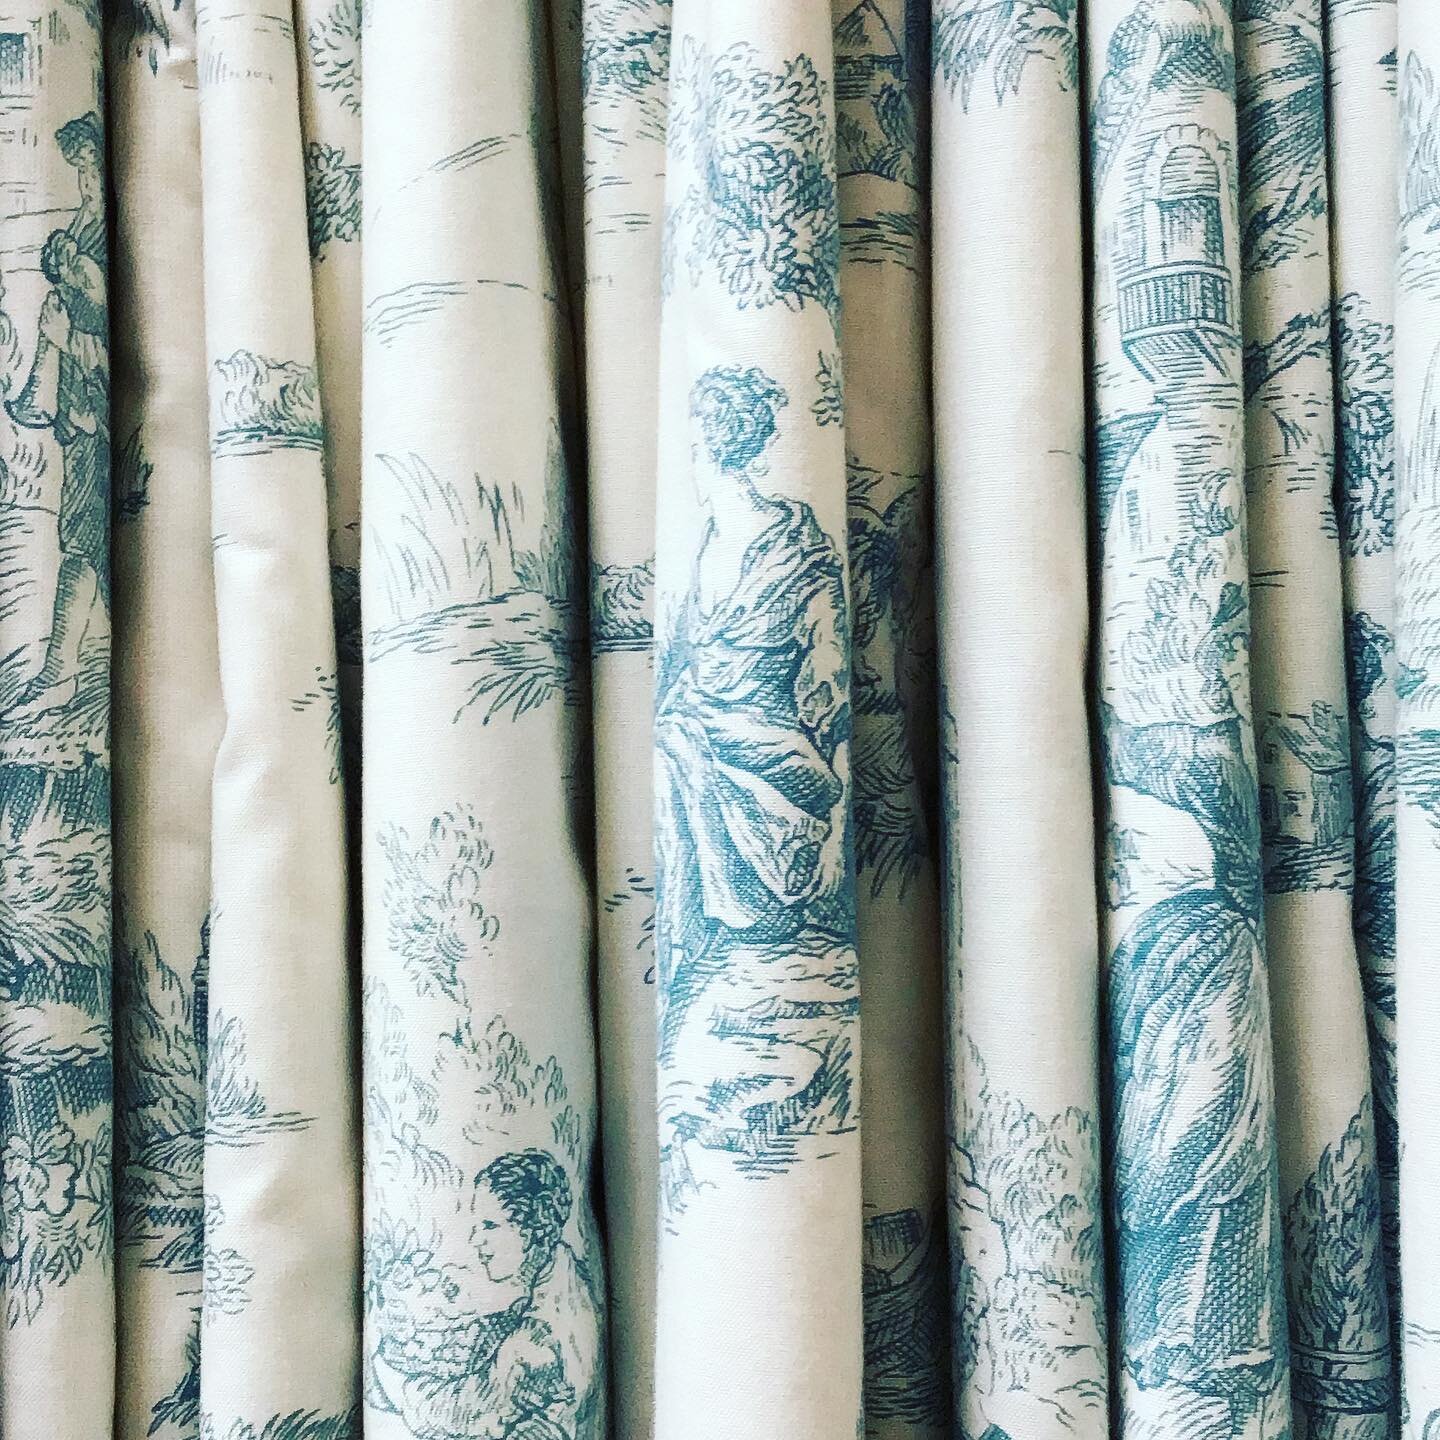 Timeless Toile de Jouy full length curtains for a touch of classic French style. #Toiledejouy #beautifulcurtains #classicfrenchstyle #classicinteriordesign #Timelessfabrics